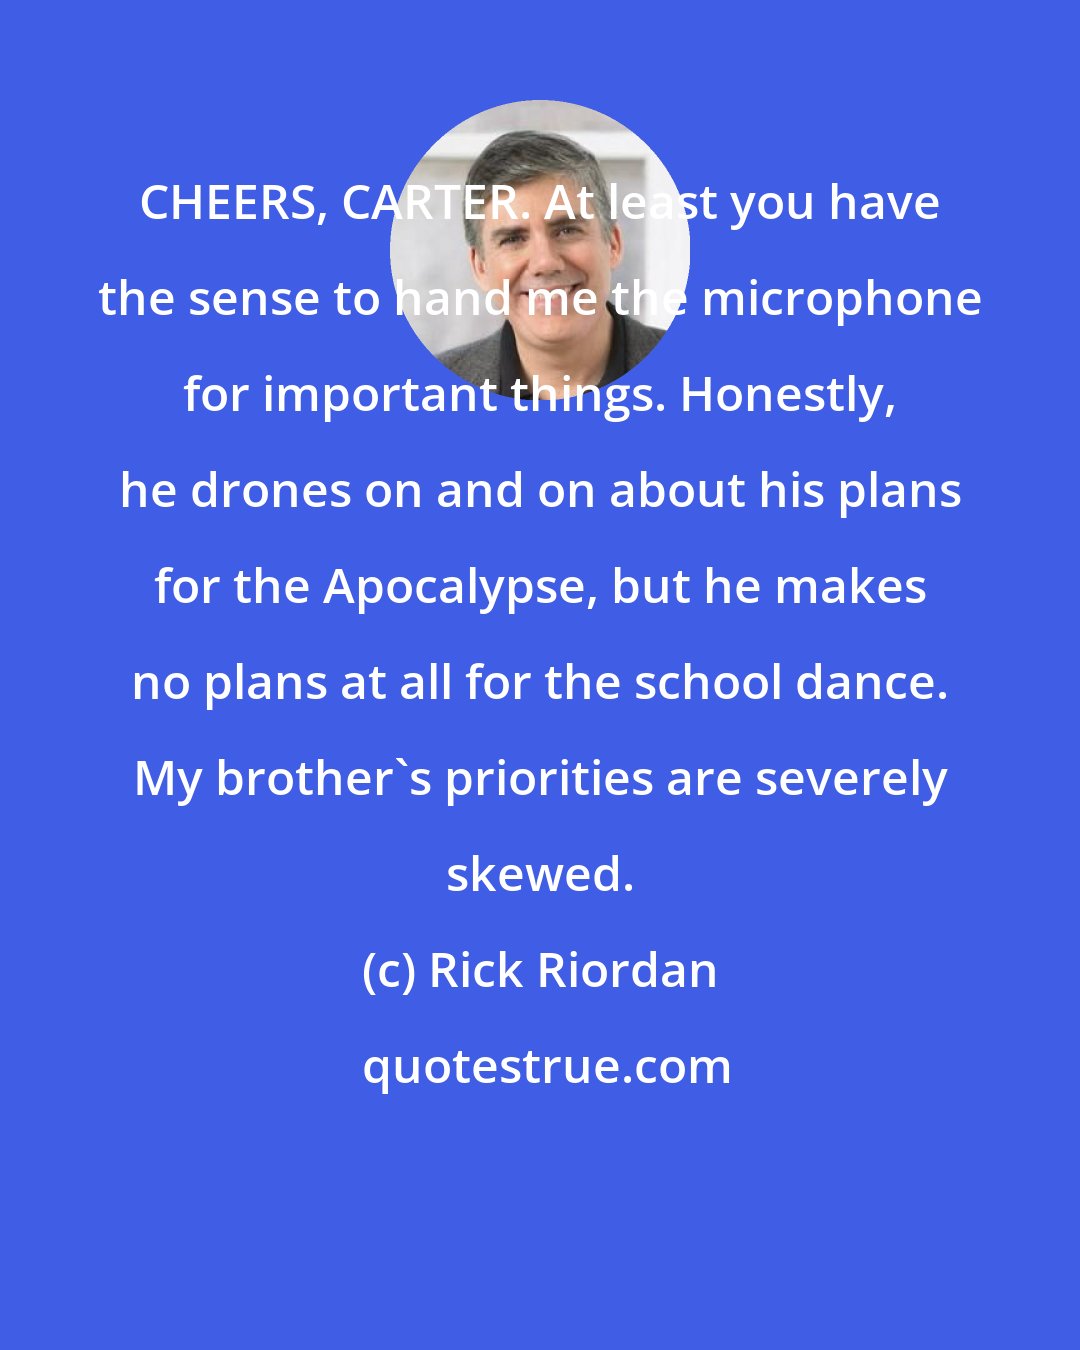 Rick Riordan: CHEERS, CARTER. At least you have the sense to hand me the microphone for important things. Honestly, he drones on and on about his plans for the Apocalypse, but he makes no plans at all for the school dance. My brother's priorities are severely skewed.